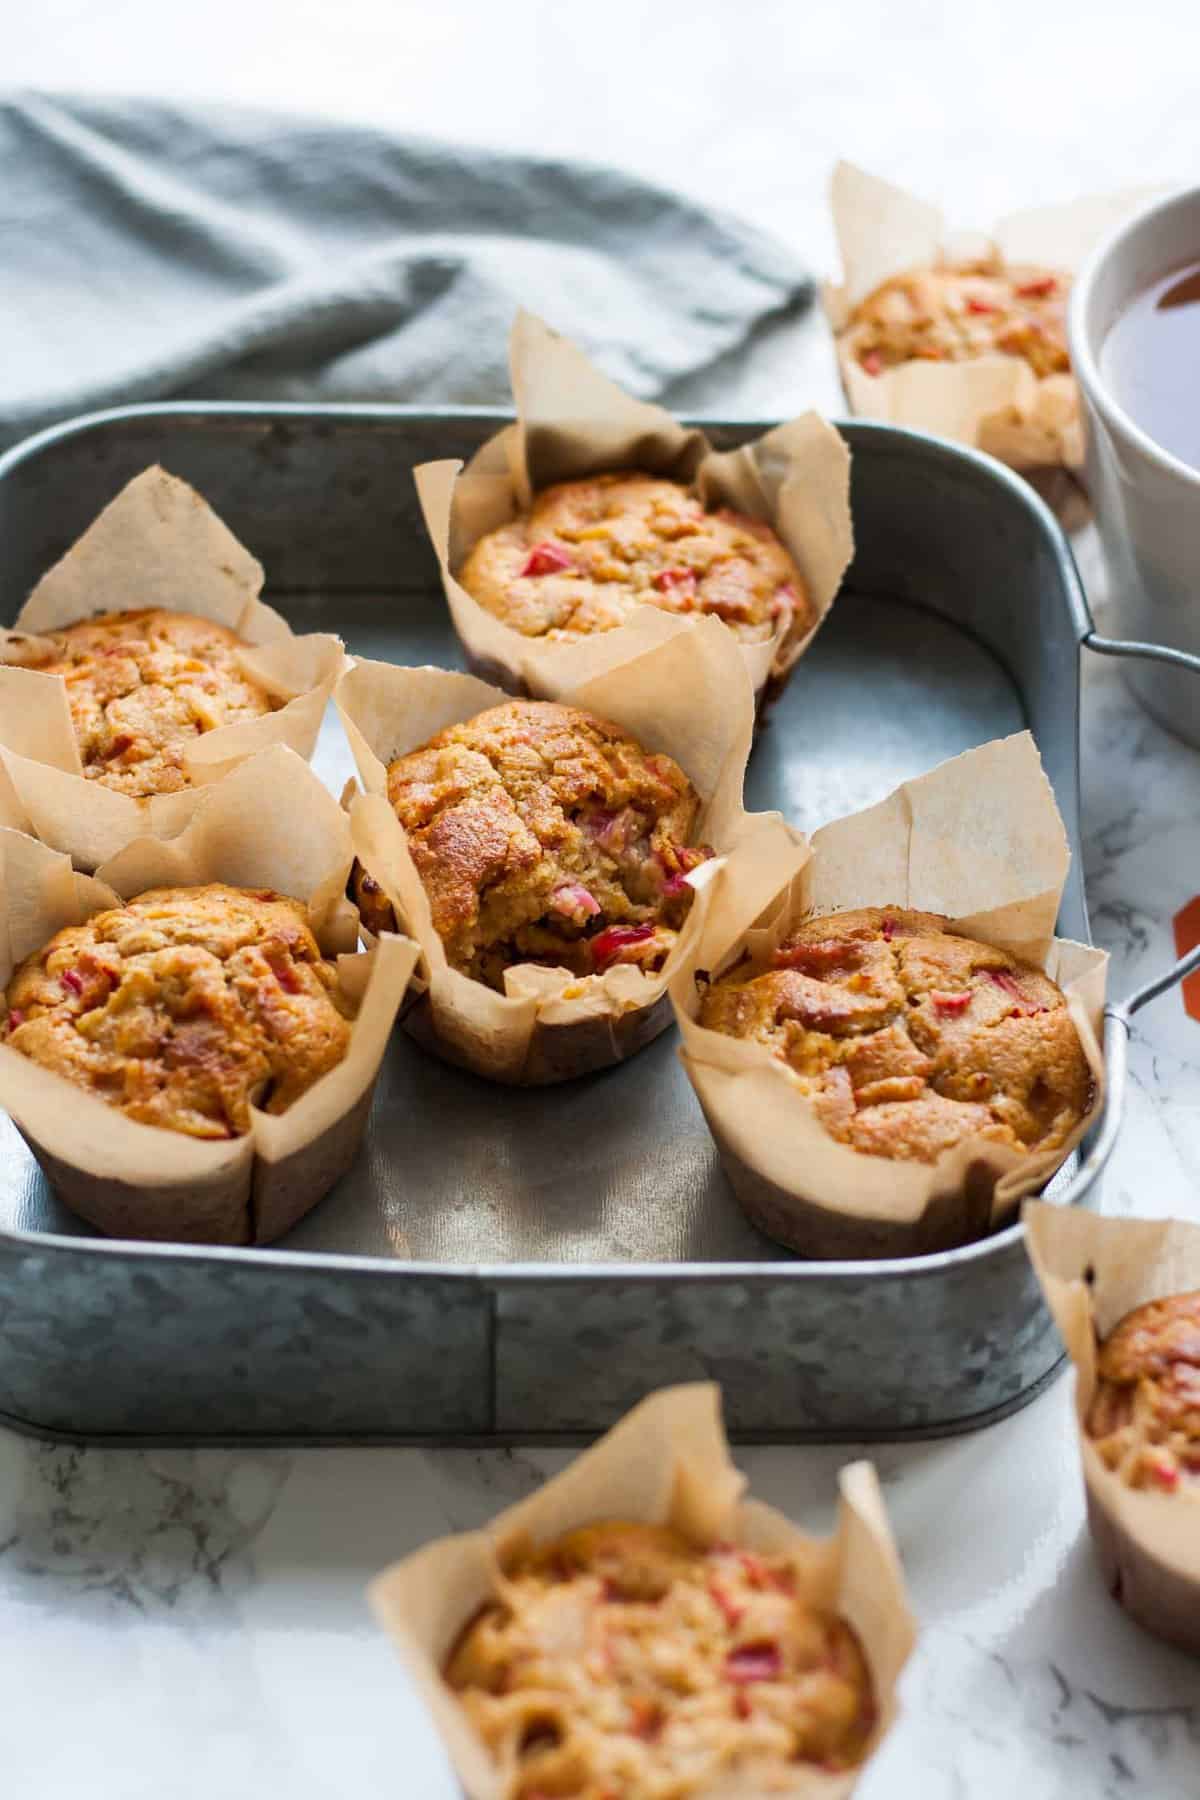 Blood Orange Rhubarb Muffins - these muffins are easy to make, full of delicious seasonal fruit and are perfect for breakfast! | eatloveeats.com